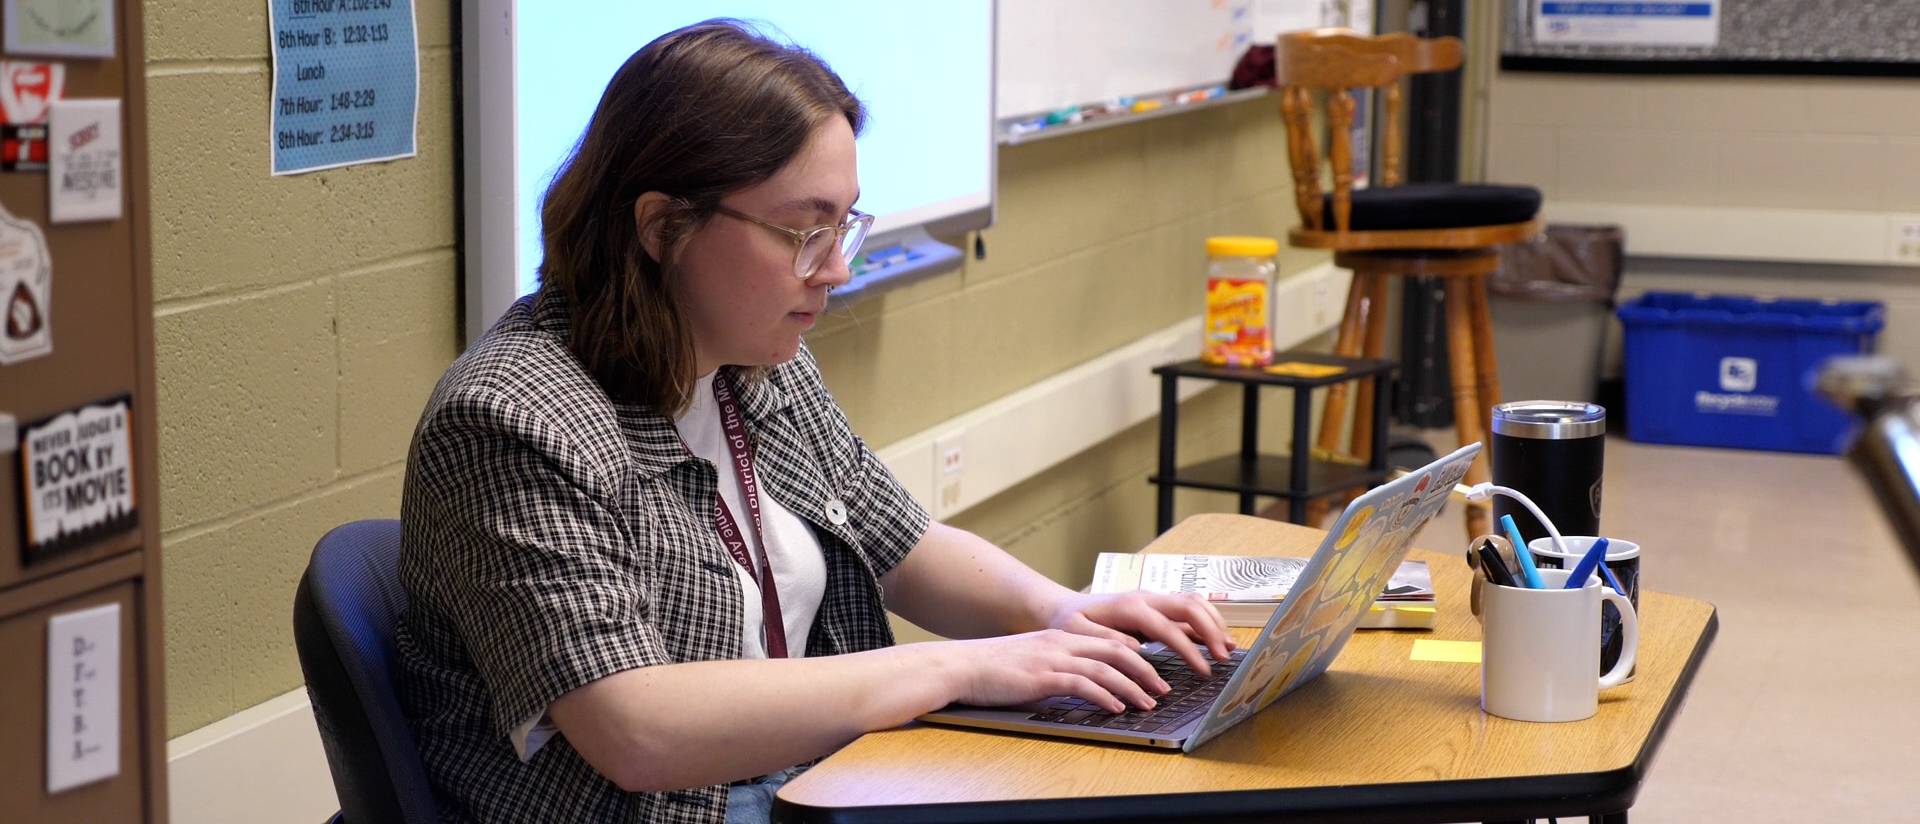 Teacher works at their laptop in a classroom setting